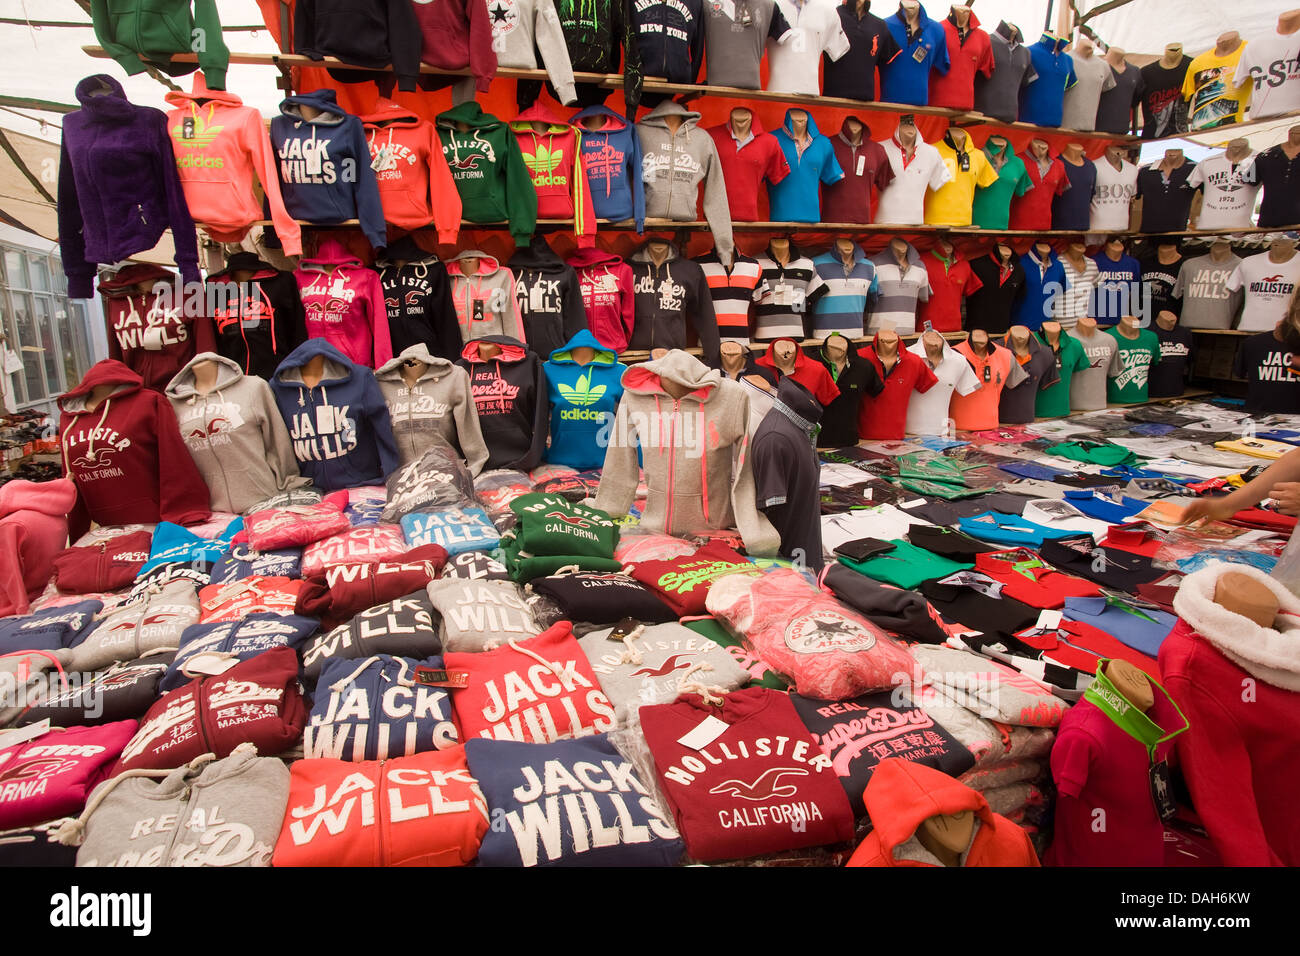 Stall in street market selling T shirts etc., Stock Photo